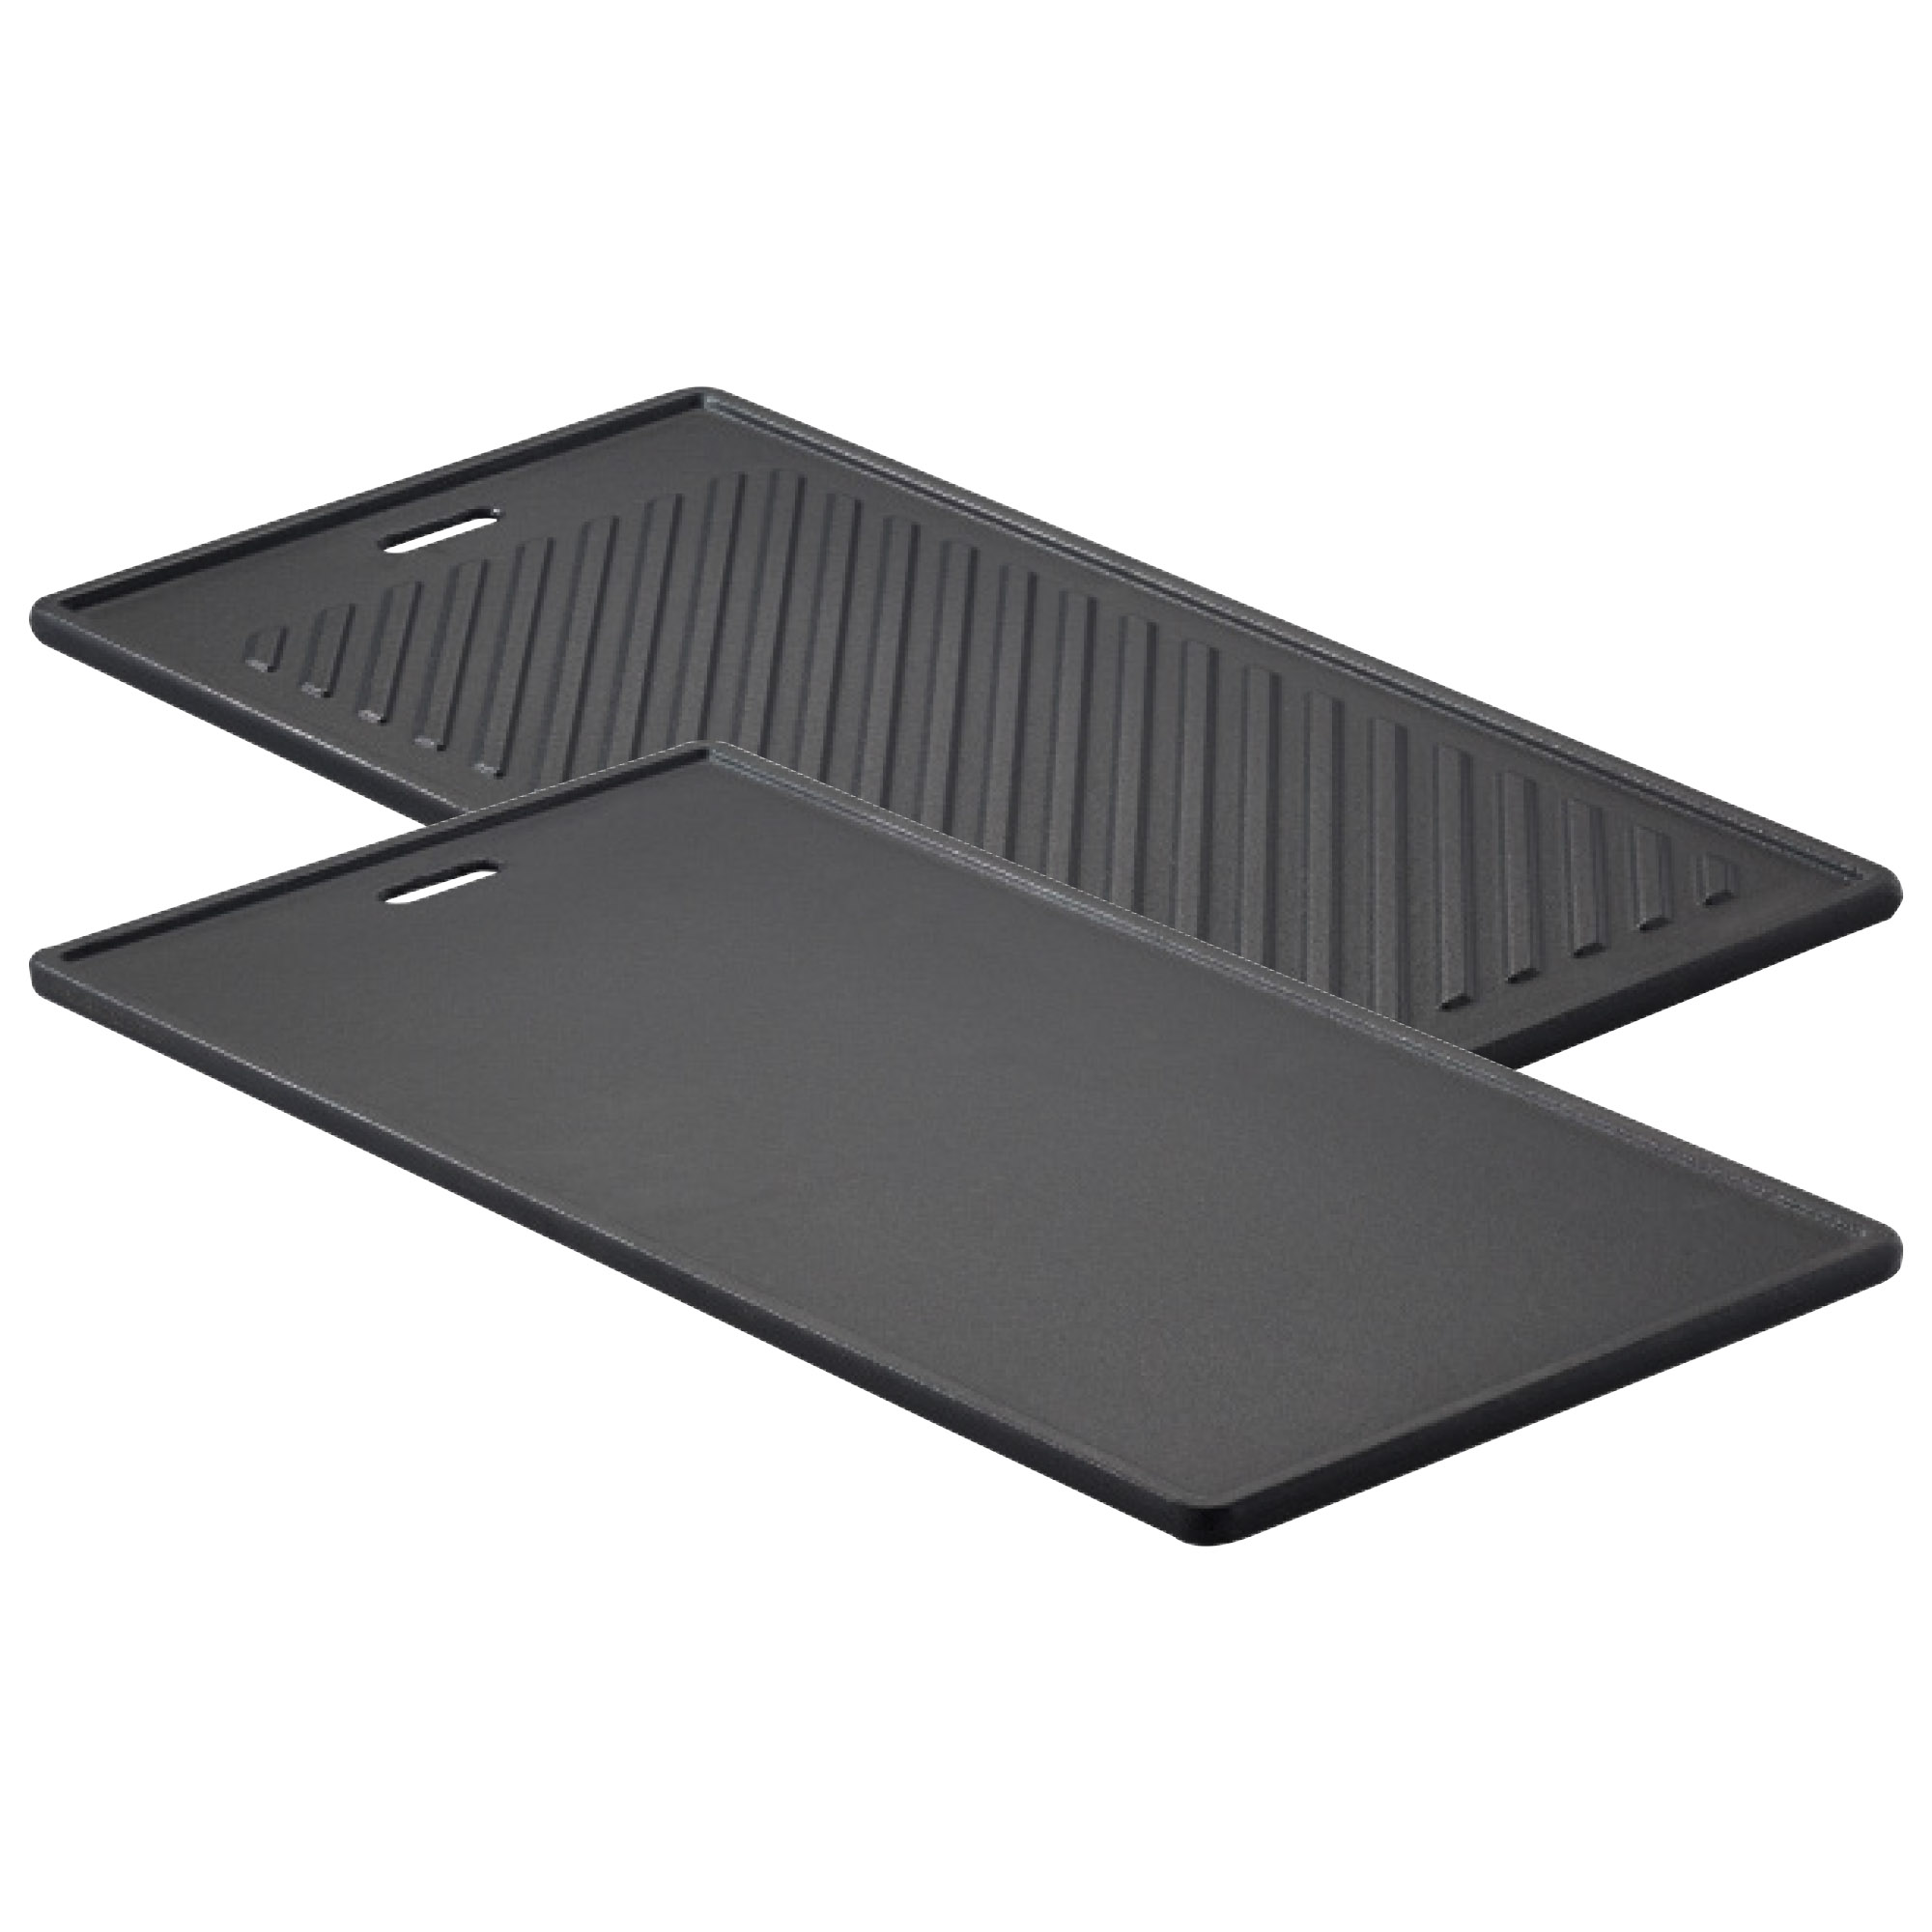 Grilling Plate VIDERO, 24 x 45 cm (starting from model year 2021)